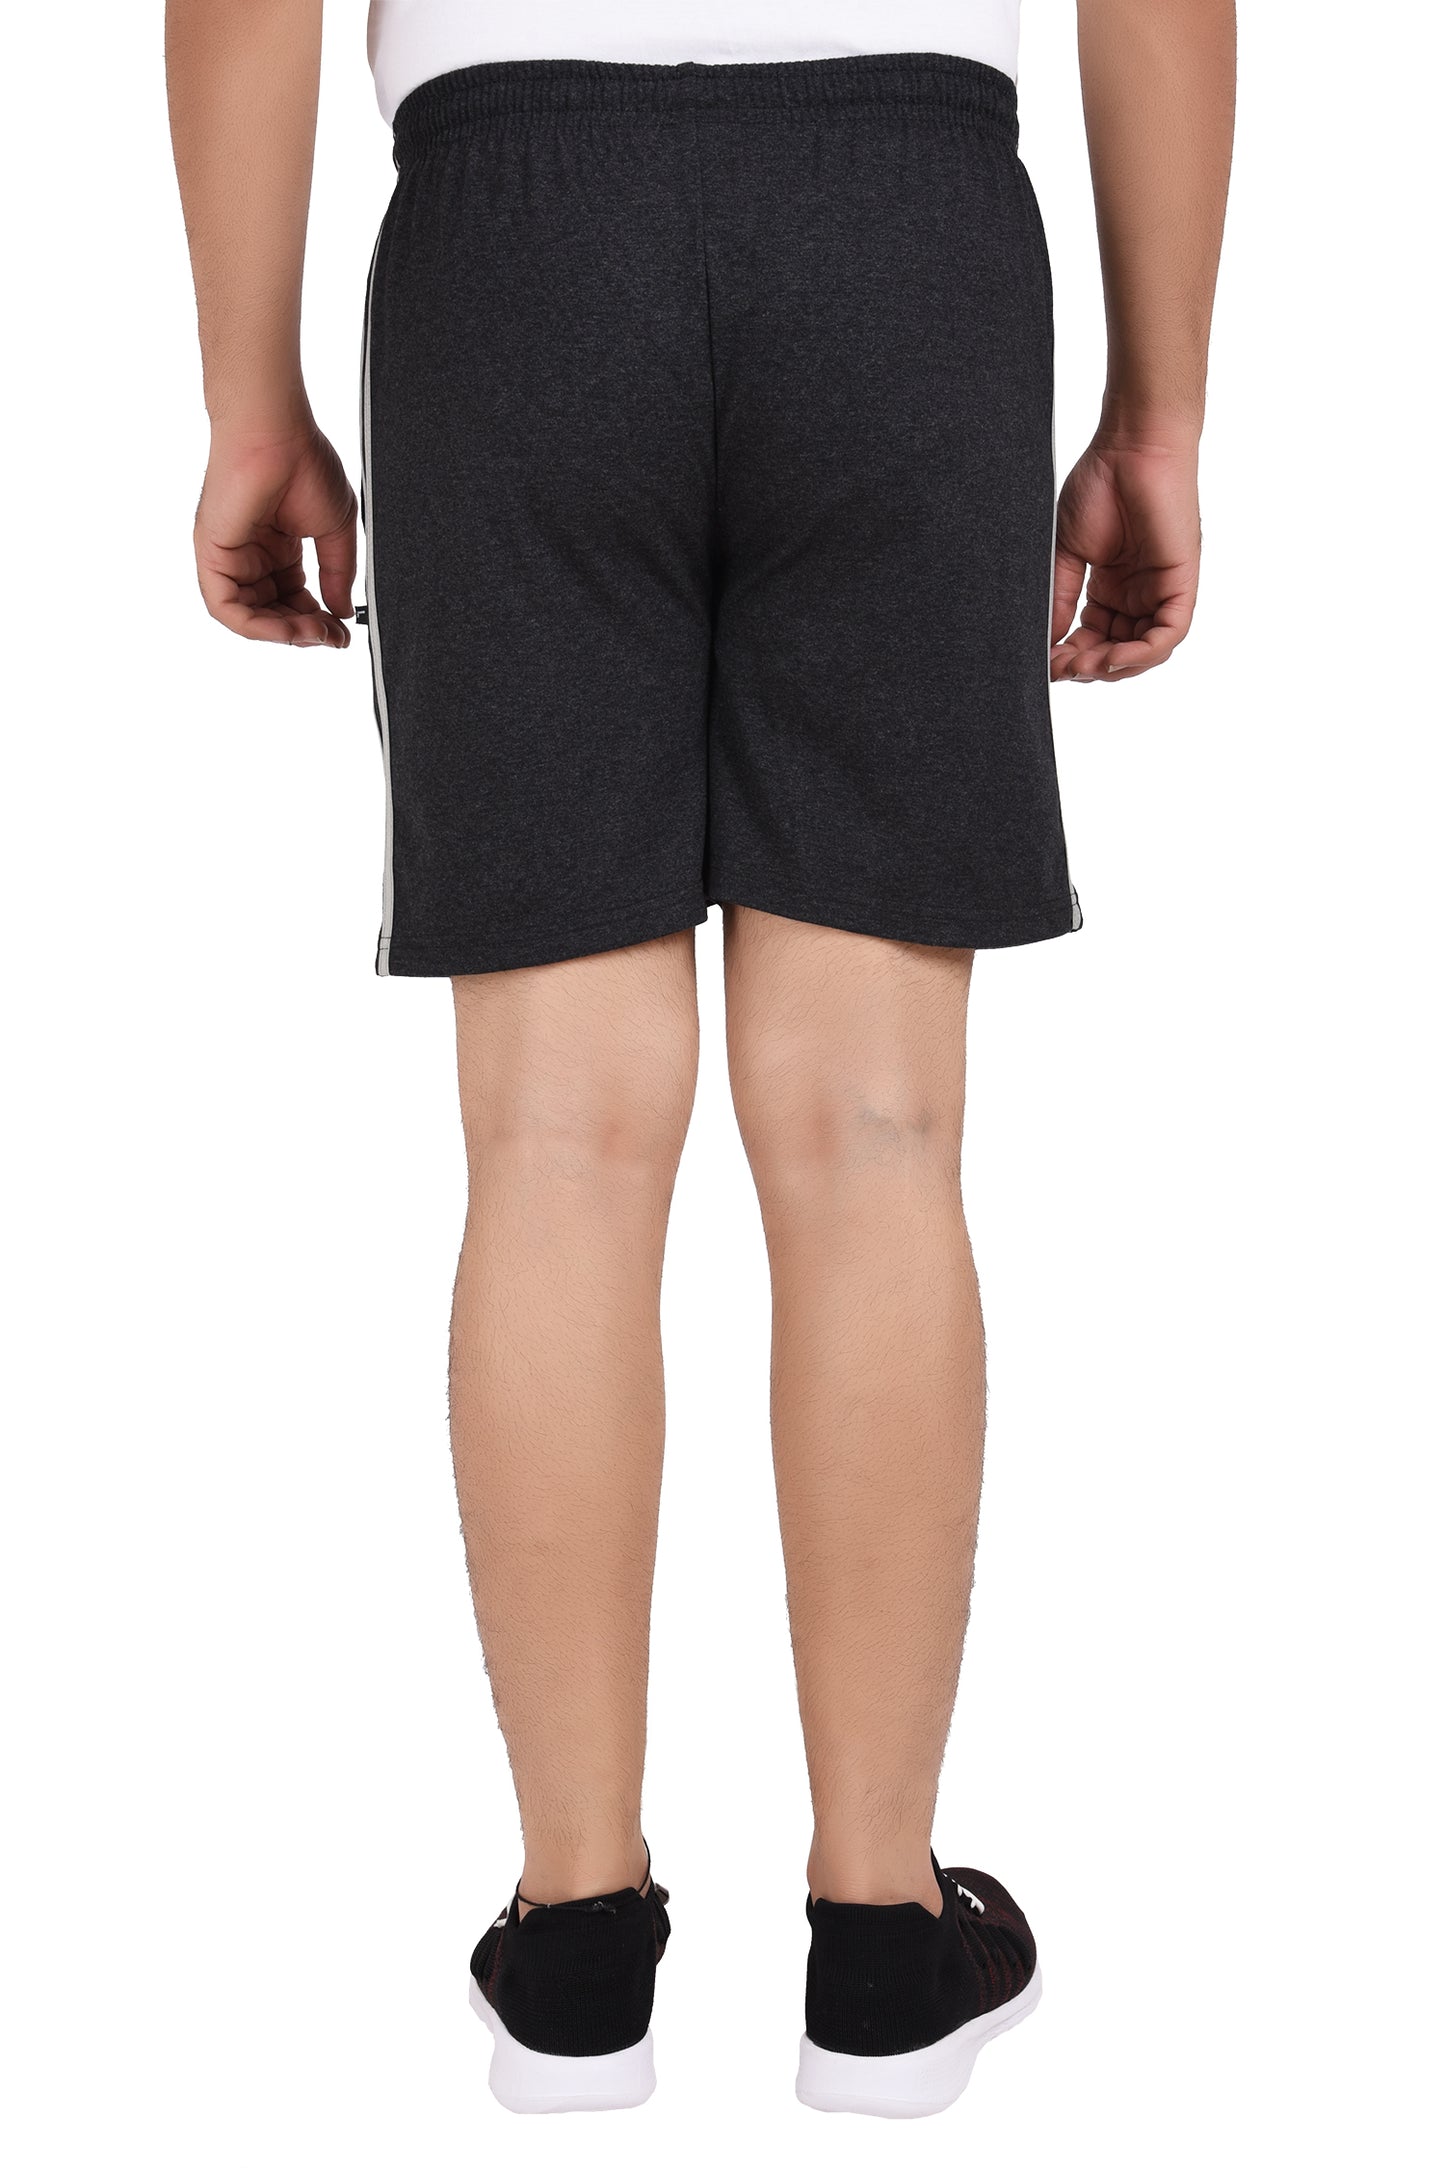 NEO GARMENTS Men’s Cotton Stripped Chain Pockets Long Shorts. | CARBON | SIZES FROM M TO 7XL.